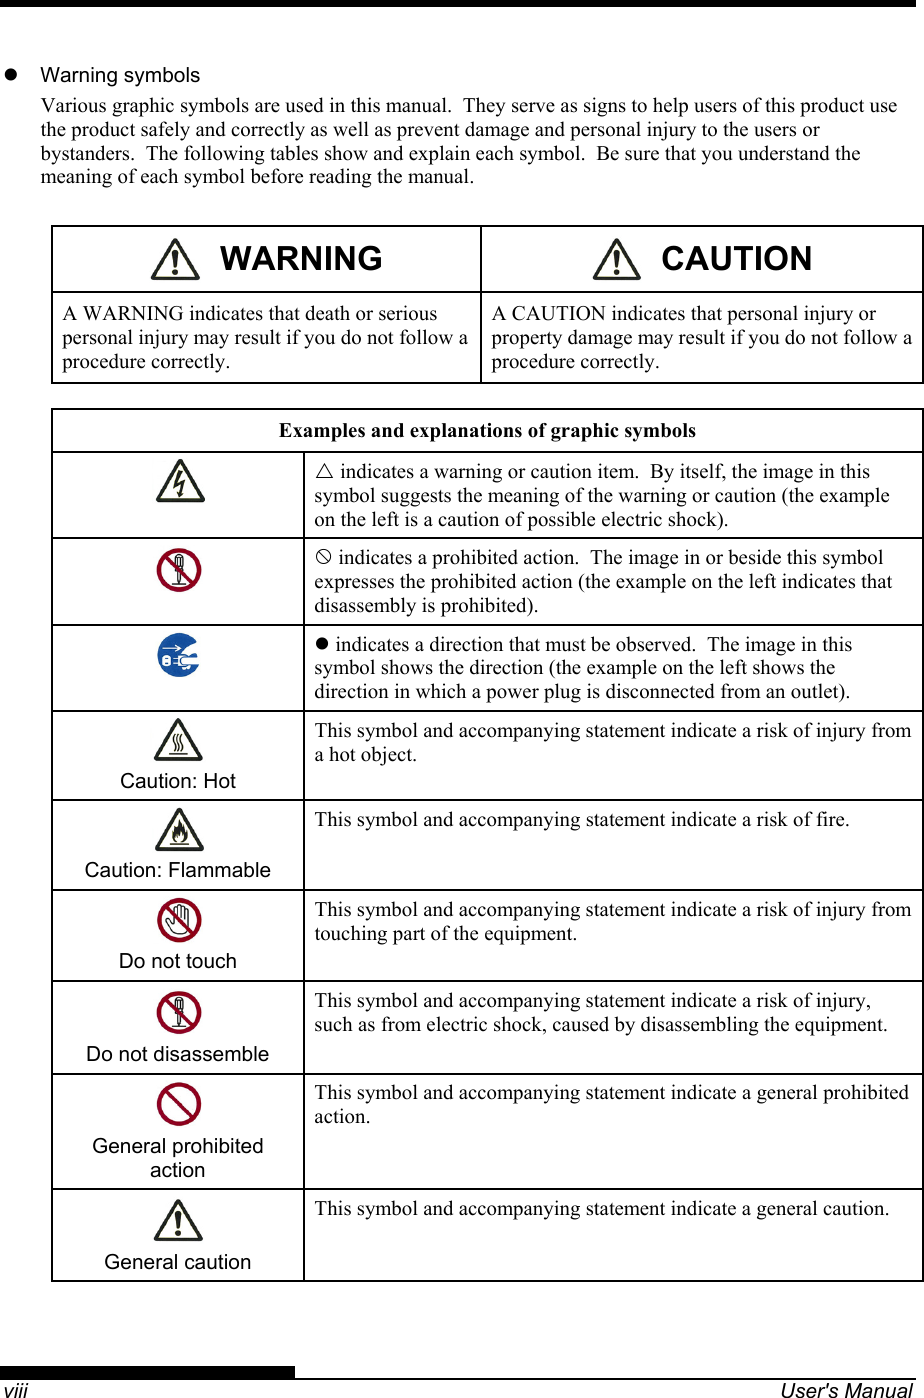    viii  User&apos;s Manual z Warning symbols Various graphic symbols are used in this manual.  They serve as signs to help users of this product use the product safely and correctly as well as prevent damage and personal injury to the users or bystanders.  The following tables show and explain each symbol.  Be sure that you understand the meaning of each symbol before reading the manual.    WARNING    CAUTION A WARNING indicates that death or serious personal injury may result if you do not follow a procedure correctly. A CAUTION indicates that personal injury or property damage may result if you do not follow a procedure correctly.  Examples and explanations of graphic symbols  U indicates a warning or caution item.  By itself, the image in this symbol suggests the meaning of the warning or caution (the example on the left is a caution of possible electric shock).  : indicates a prohibited action.  The image in or beside this symbol expresses the prohibited action (the example on the left indicates that disassembly is prohibited).  z indicates a direction that must be observed.  The image in this symbol shows the direction (the example on the left shows the direction in which a power plug is disconnected from an outlet).  Caution: Hot This symbol and accompanying statement indicate a risk of injury from a hot object.  Caution: Flammable This symbol and accompanying statement indicate a risk of fire.  Do not touch This symbol and accompanying statement indicate a risk of injury from touching part of the equipment.  Do not disassemble This symbol and accompanying statement indicate a risk of injury, such as from electric shock, caused by disassembling the equipment.  General prohibited action This symbol and accompanying statement indicate a general prohibited action.  General caution This symbol and accompanying statement indicate a general caution. 